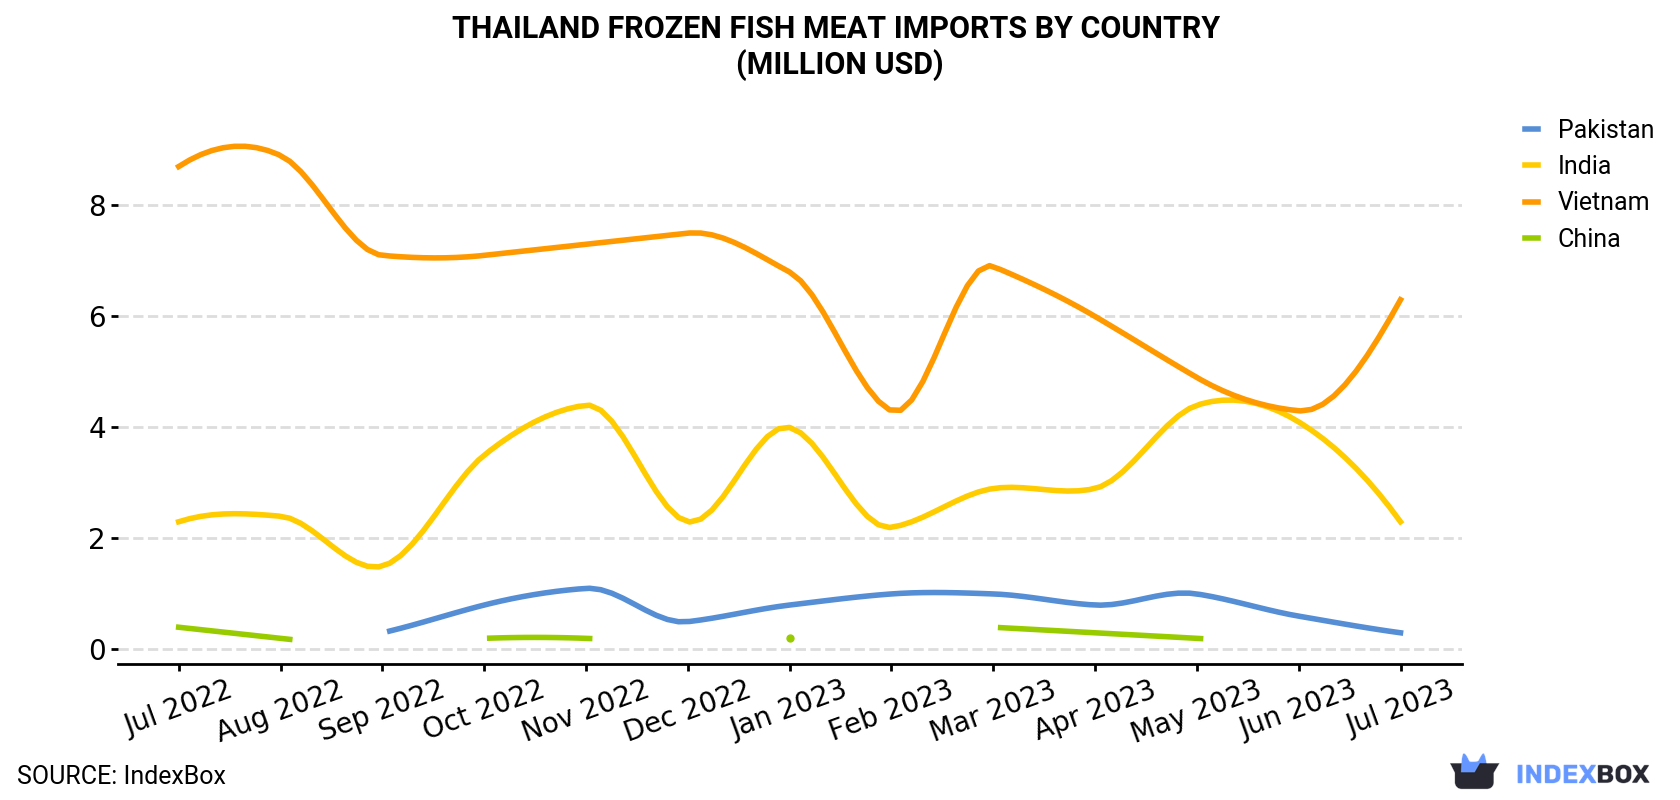 Thailand Frozen Fish Meat Imports By Country (Million USD)